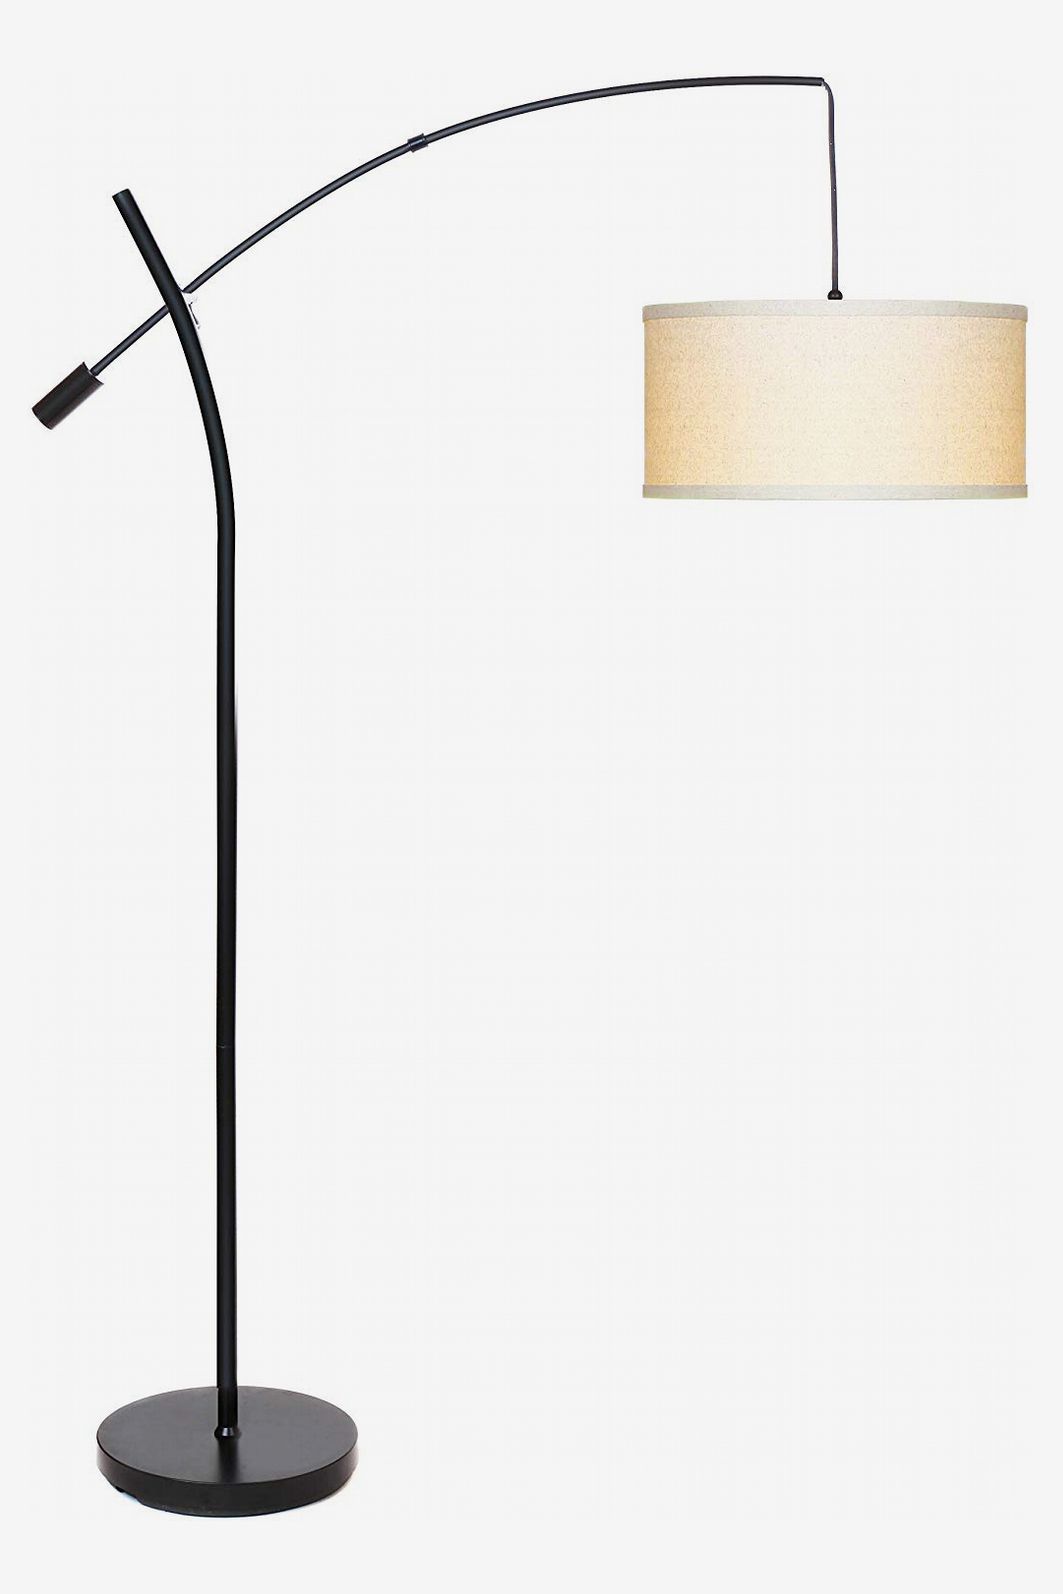 10 Cheap Floor Lamps and Table Lamps on Amazon 2018